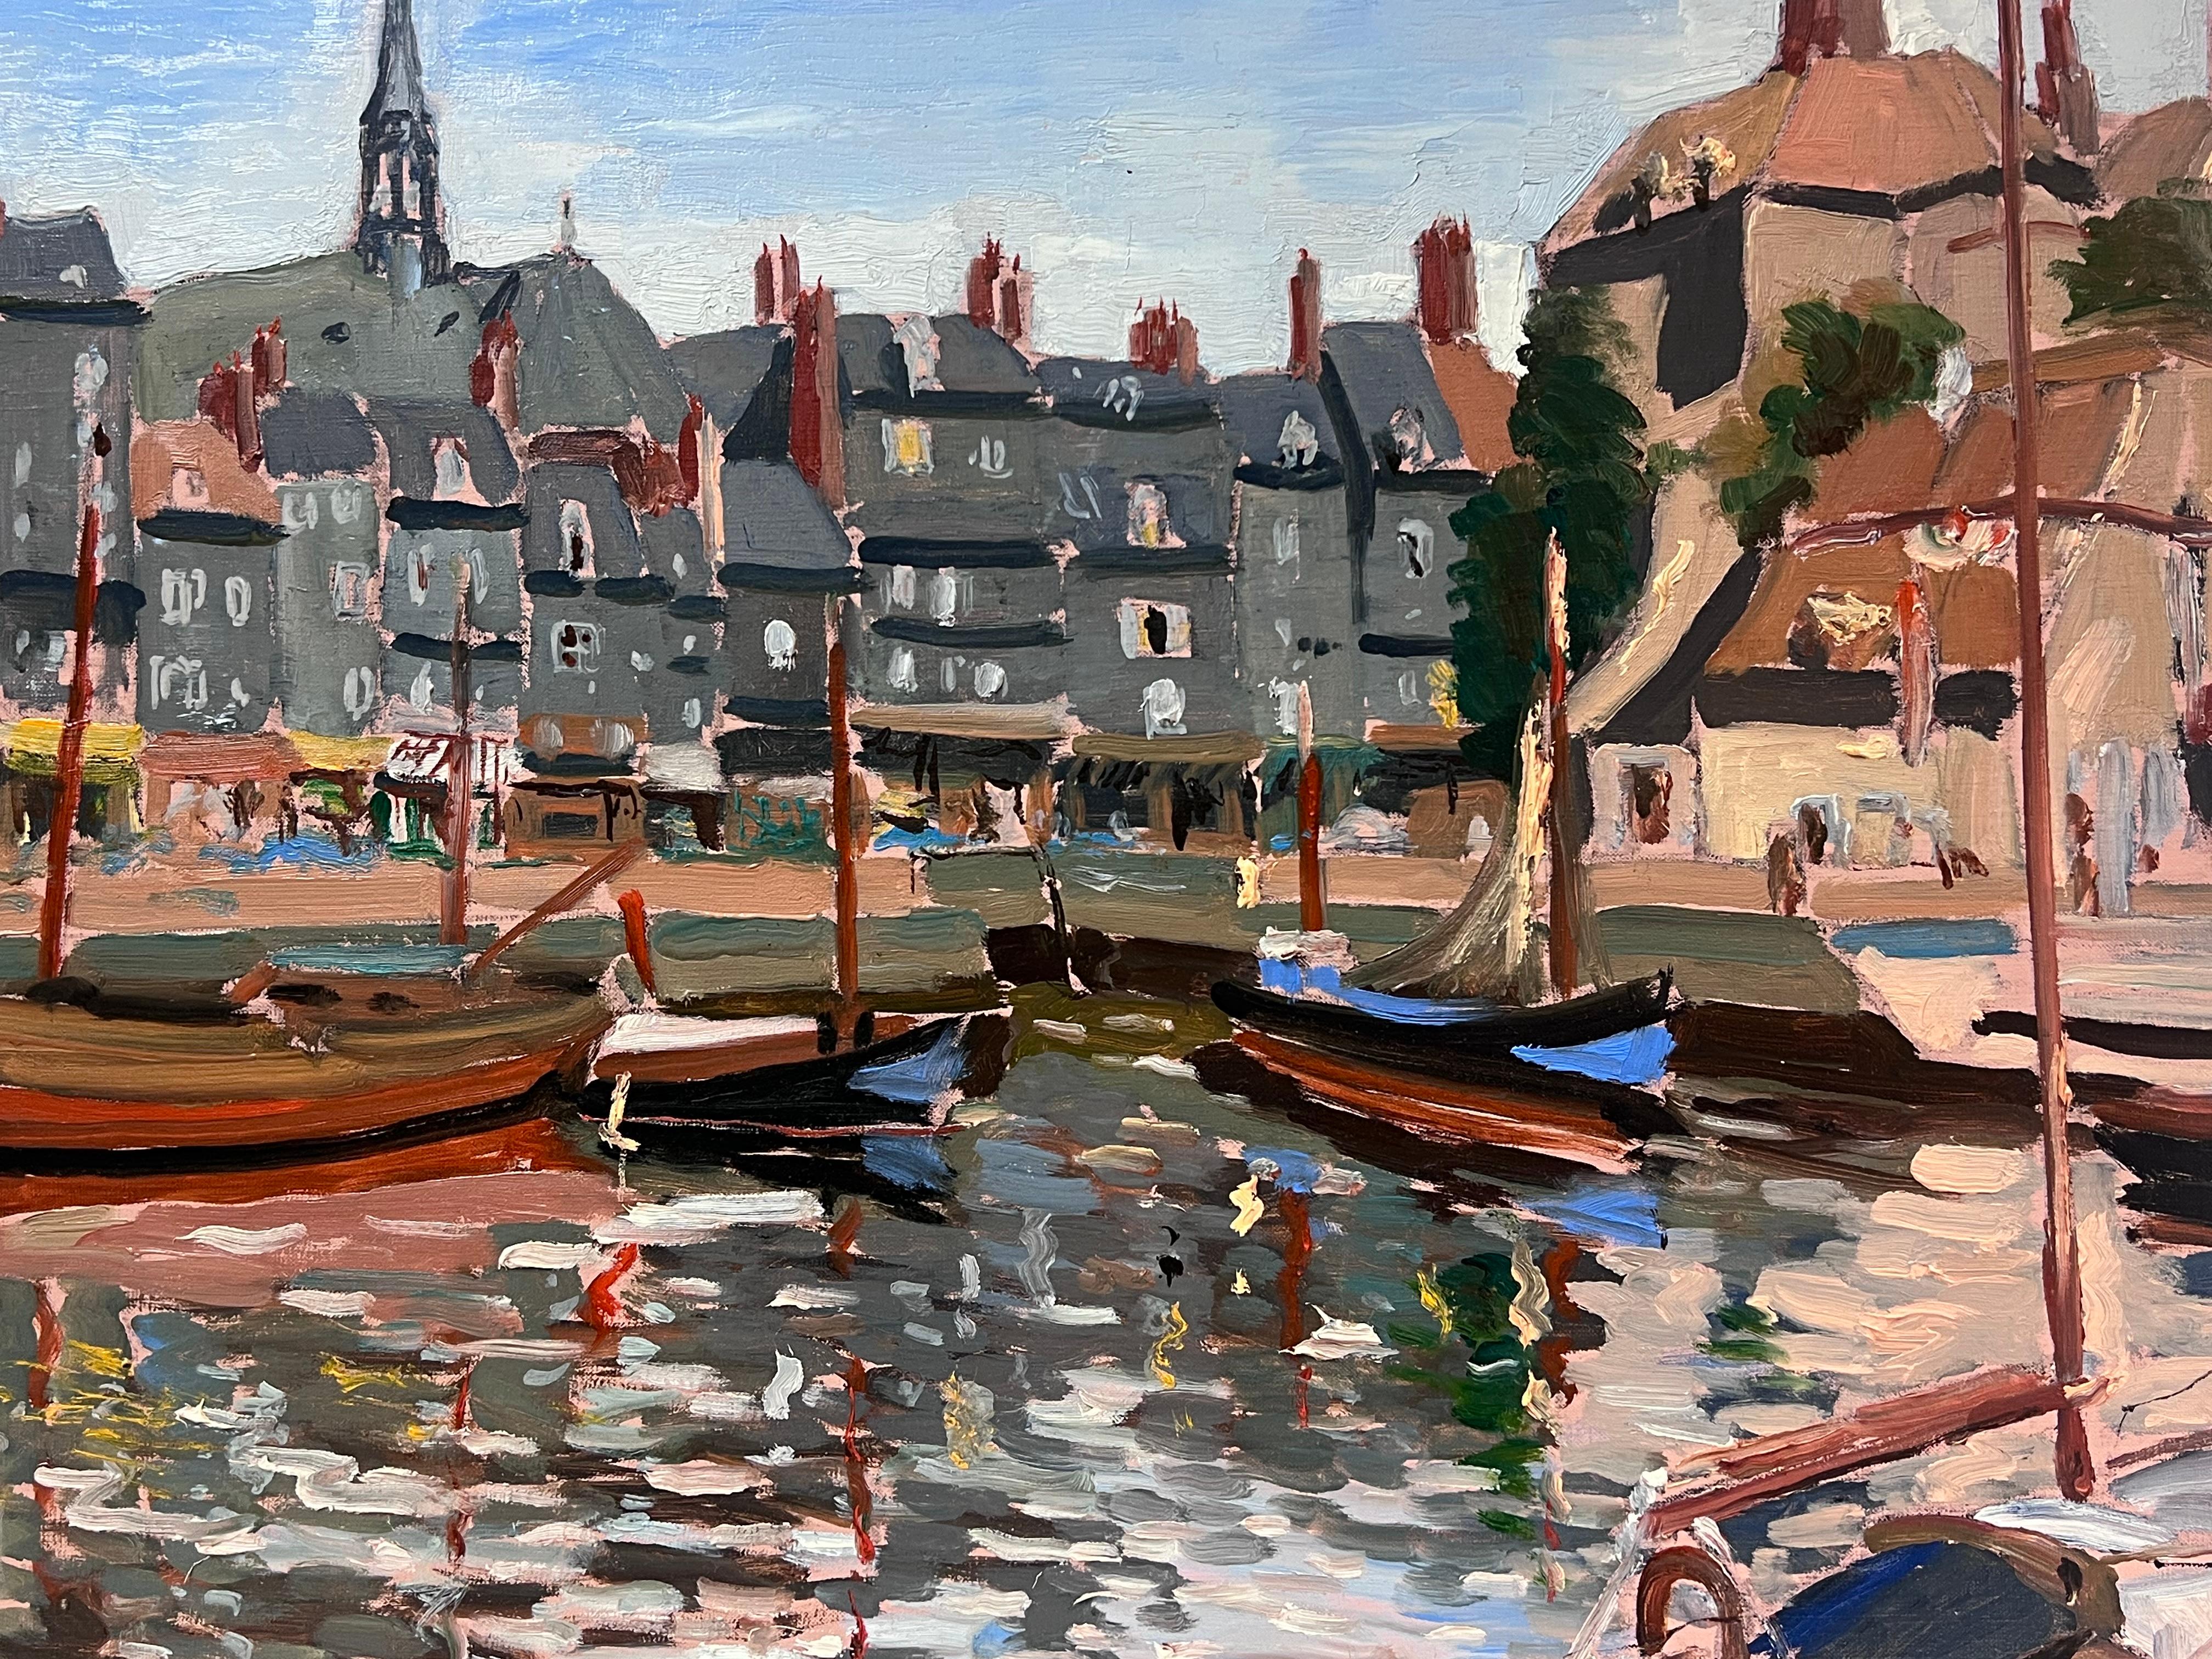 The French Harbor (we think most likely this is Honfleur, which is a subject visited by the artist several times). 

by Georges Bordonave (French contemporary)  
signed oil painting on canvas, unframed
dated 1970
unframed: 20 x 24 inches
condition: